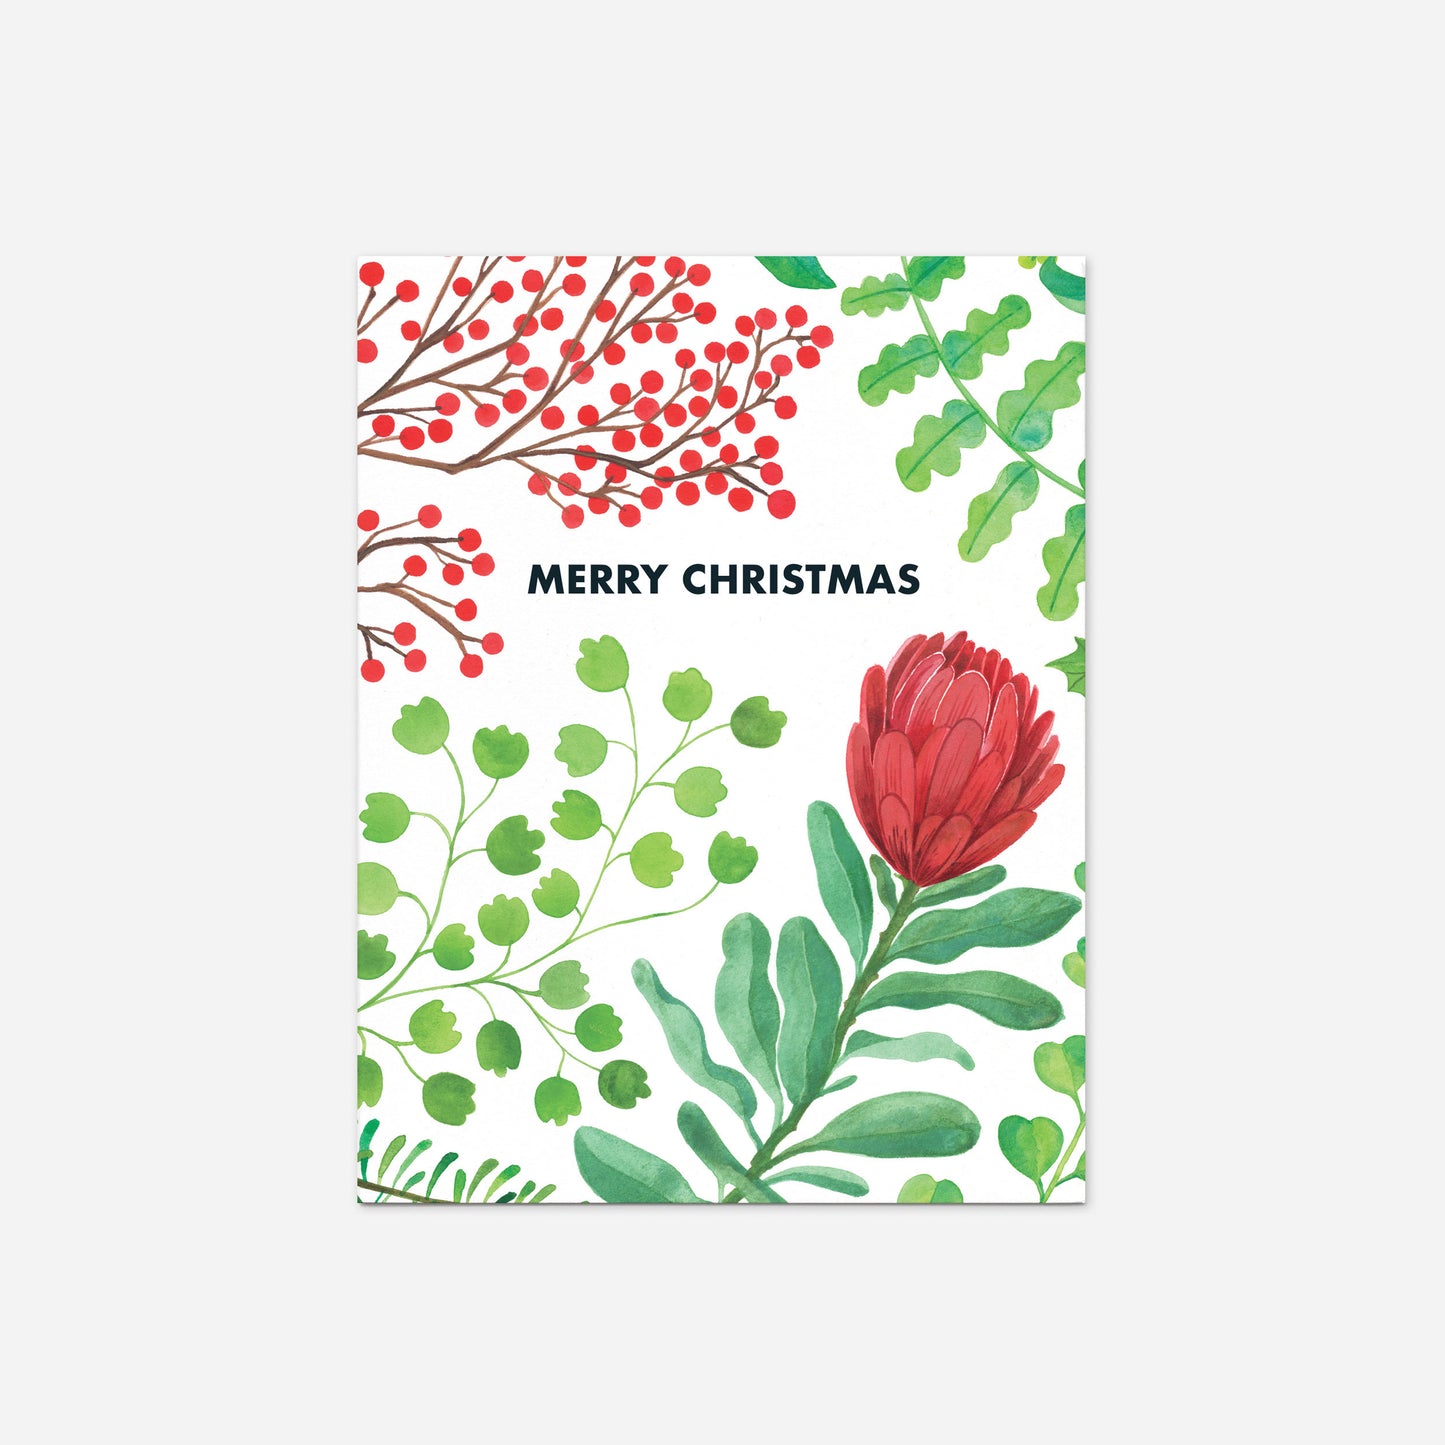 Set of 8 "Merry Christmas" Greeting Cards